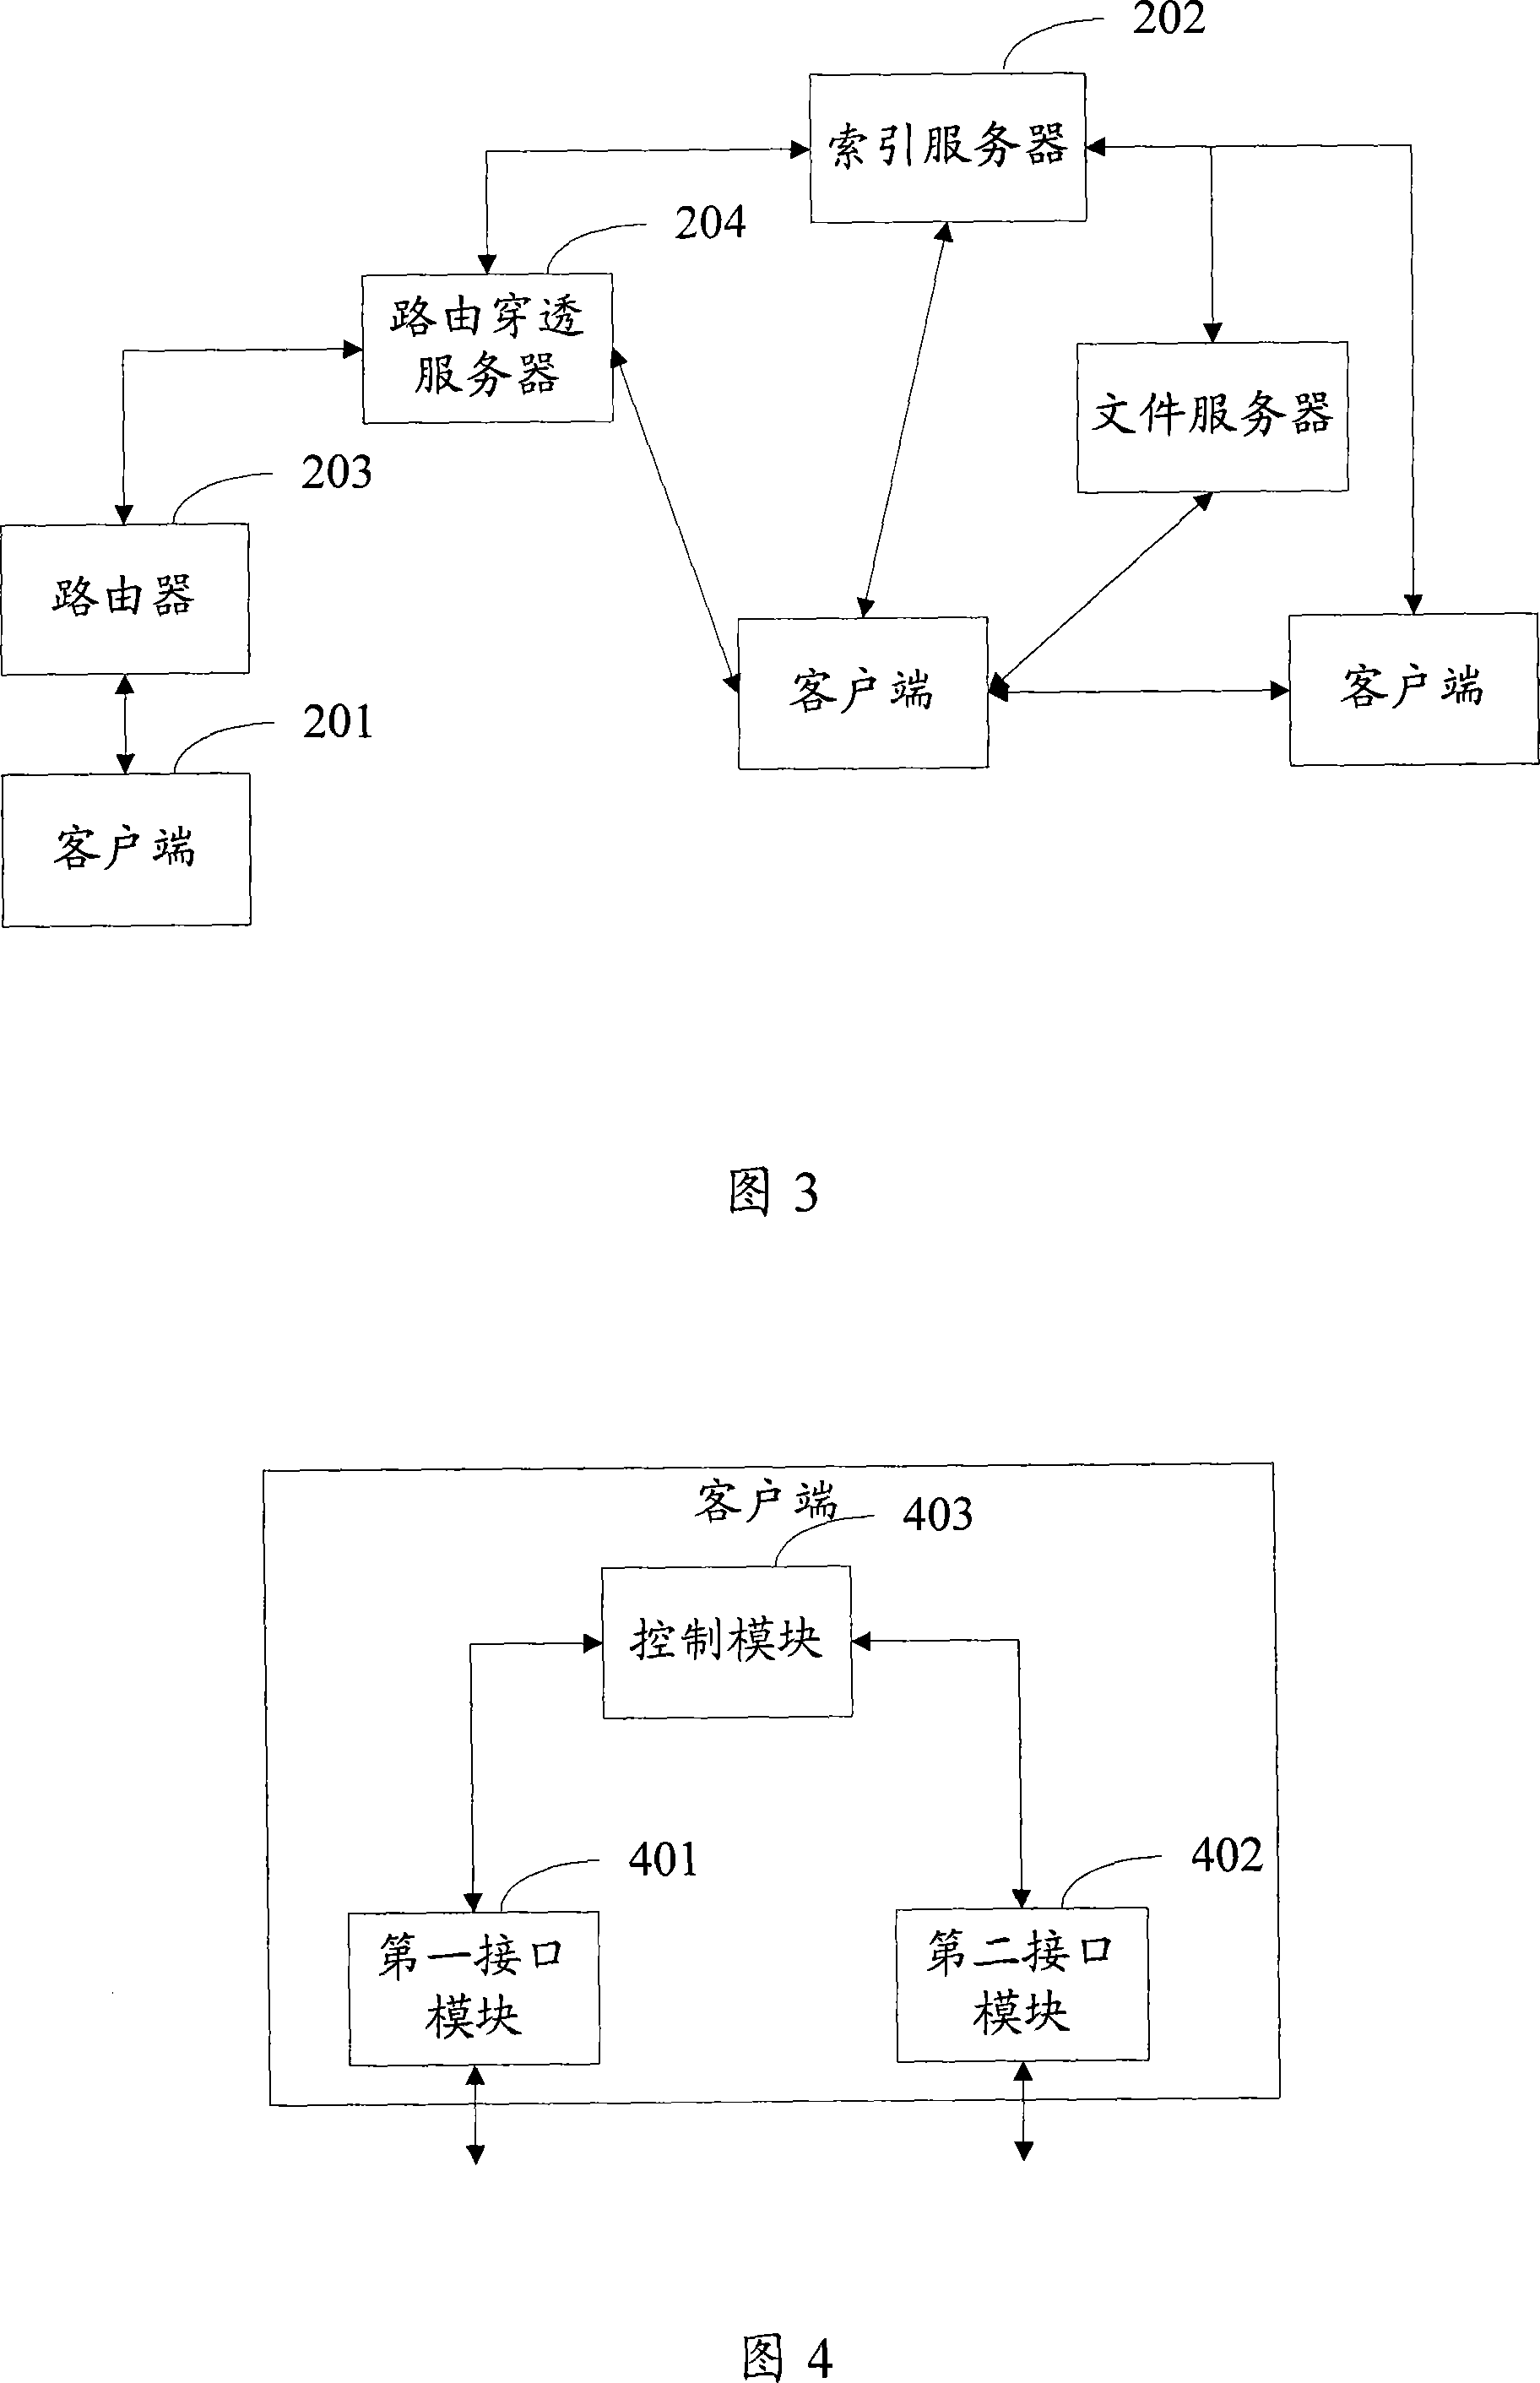 A method and system for transmitting data between clients